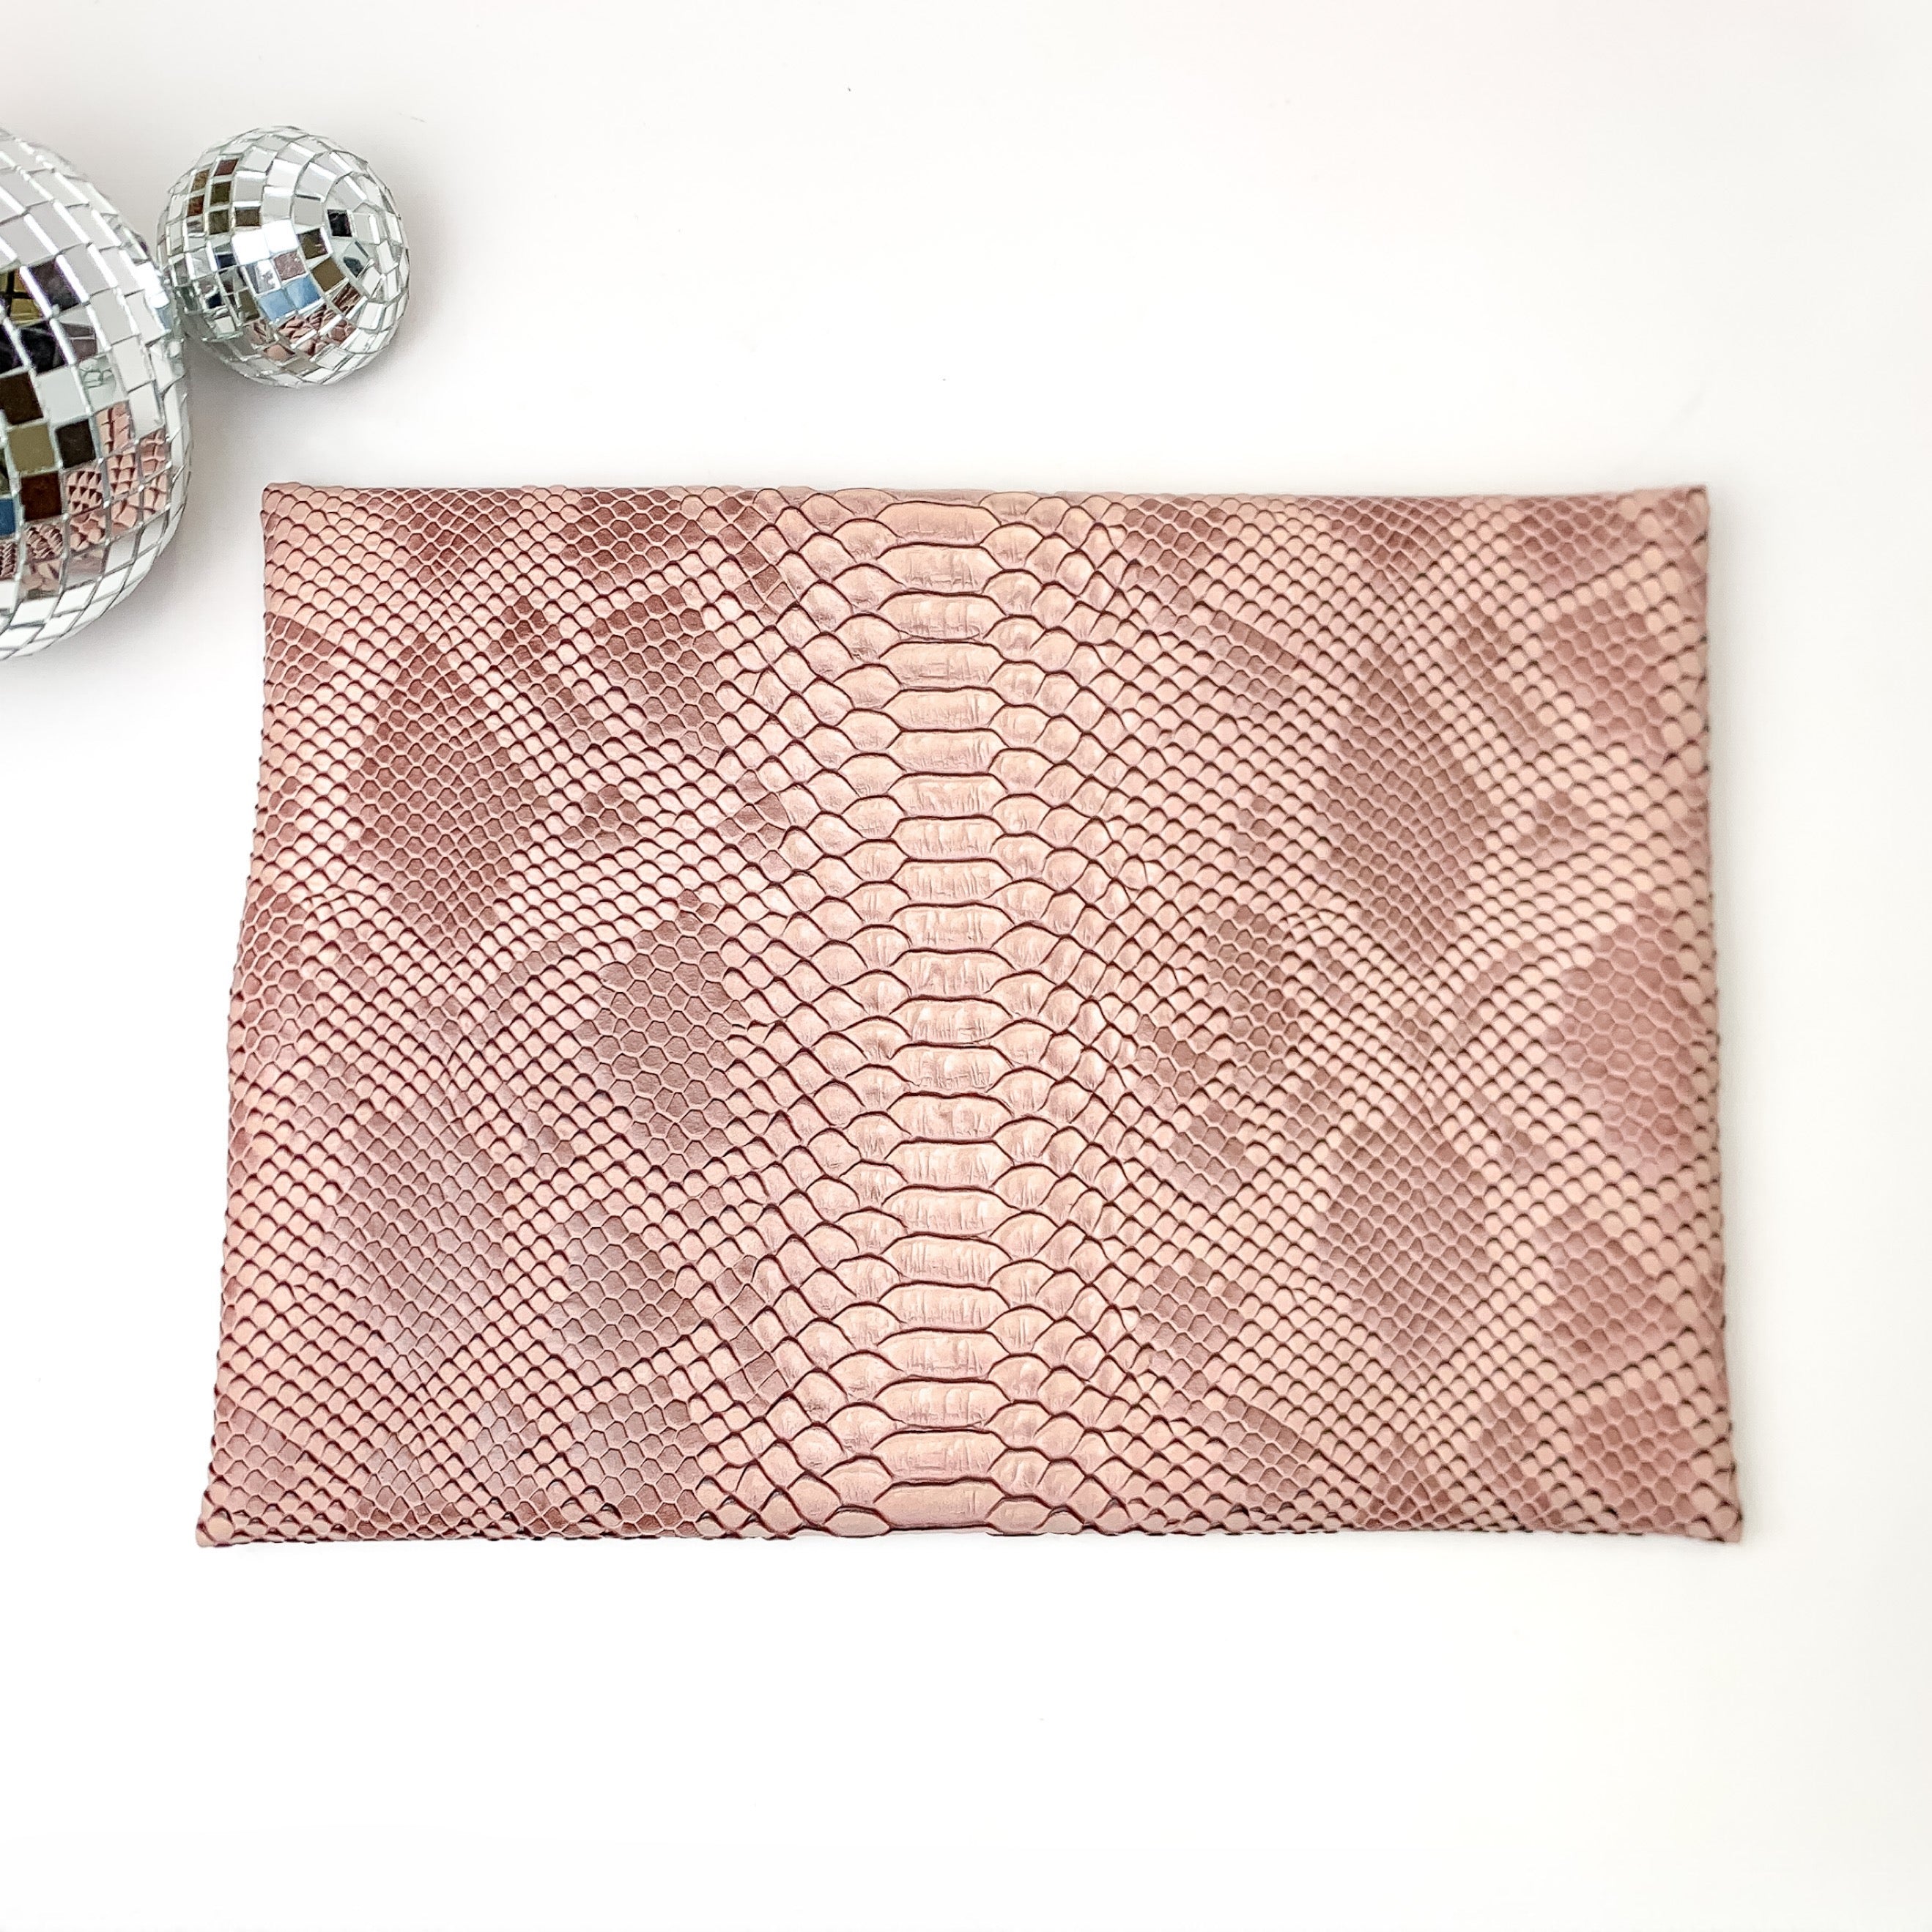 Makeup Junkie | Medium Copperazzi Lay Flat Bag in Dusty Pink Snake Print - Giddy Up Glamour Boutique